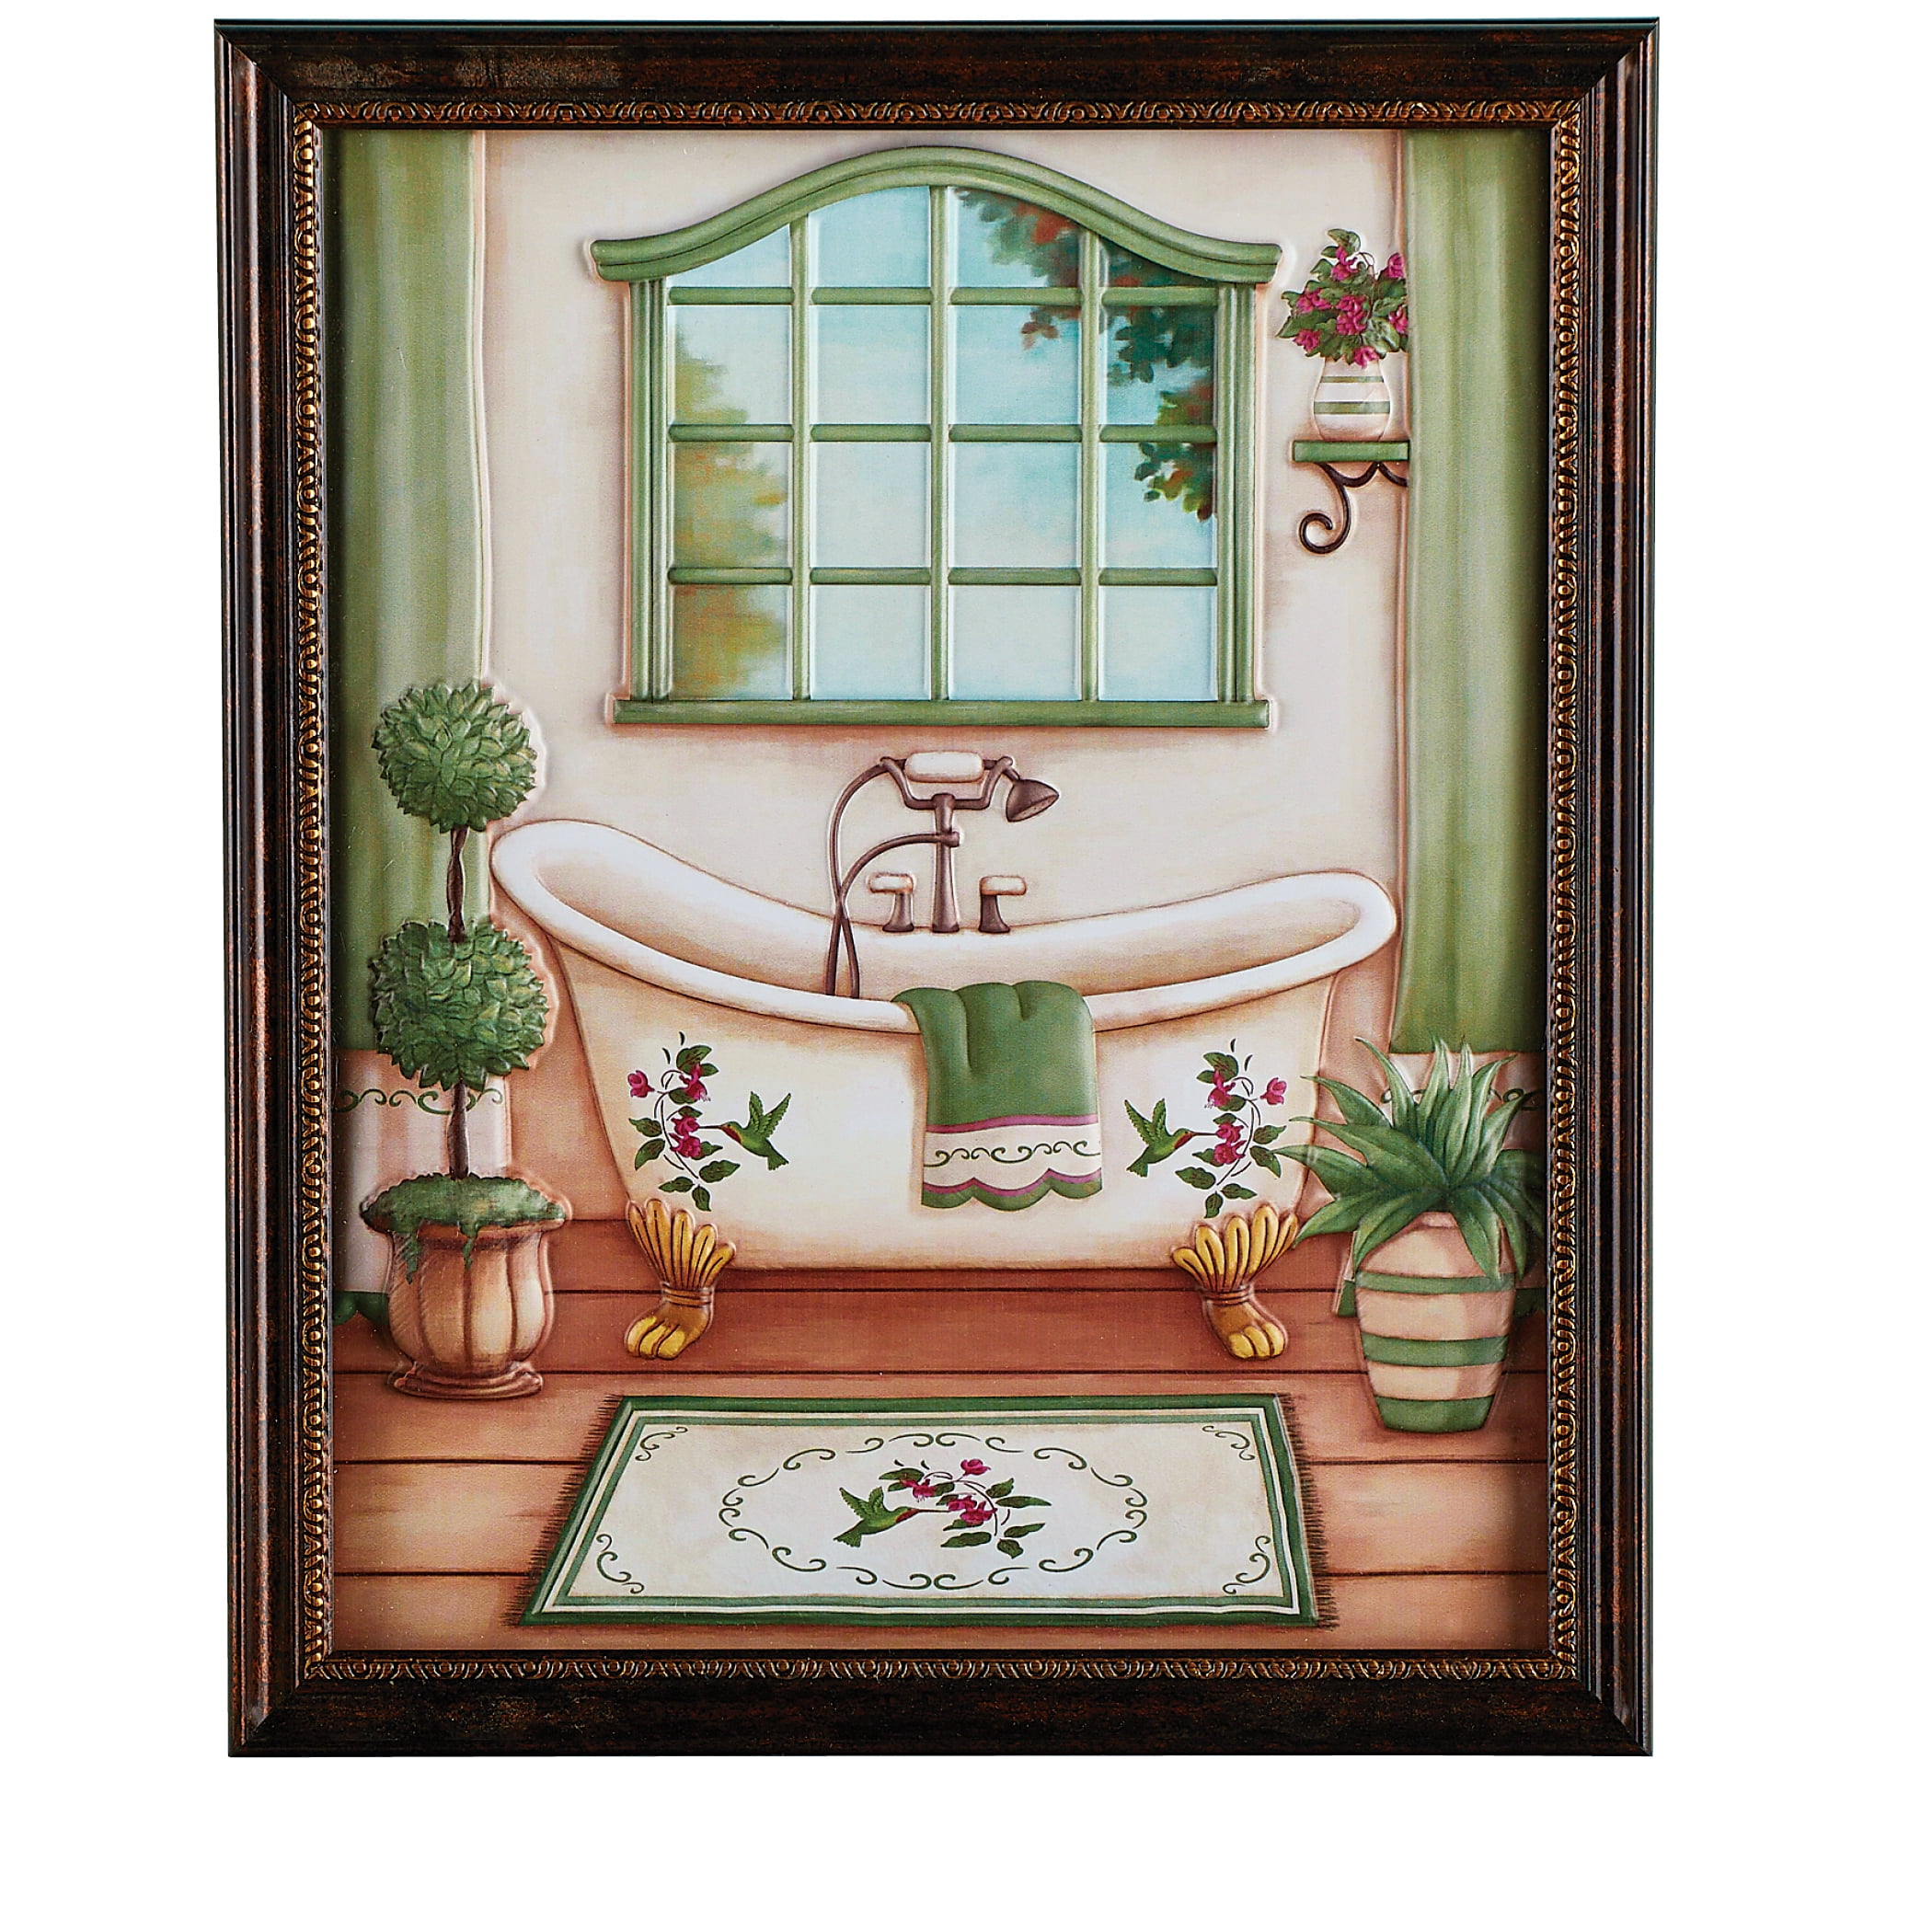 Charming & Cool Vintage Bathroom Framed Wall Art Picture - Unique Home ...